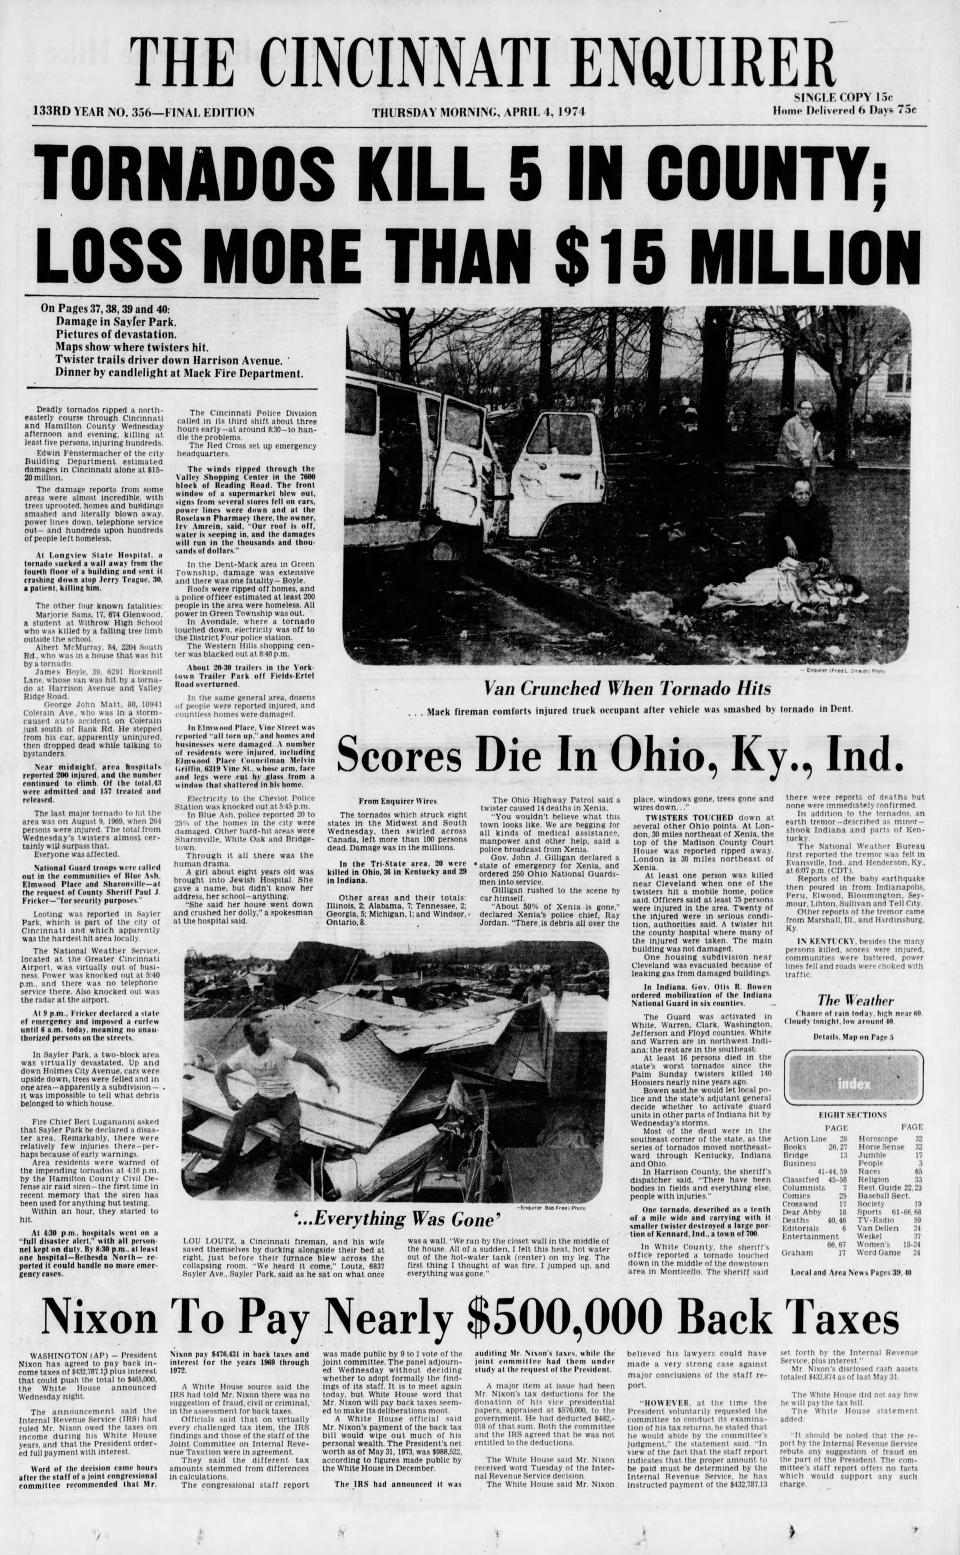 The front page of The Cincinnati Enquirer, April 4, 1974, reporting on the tornadoes in Xenia, Sayler Park and other sites in the region during the tornado outbreak.